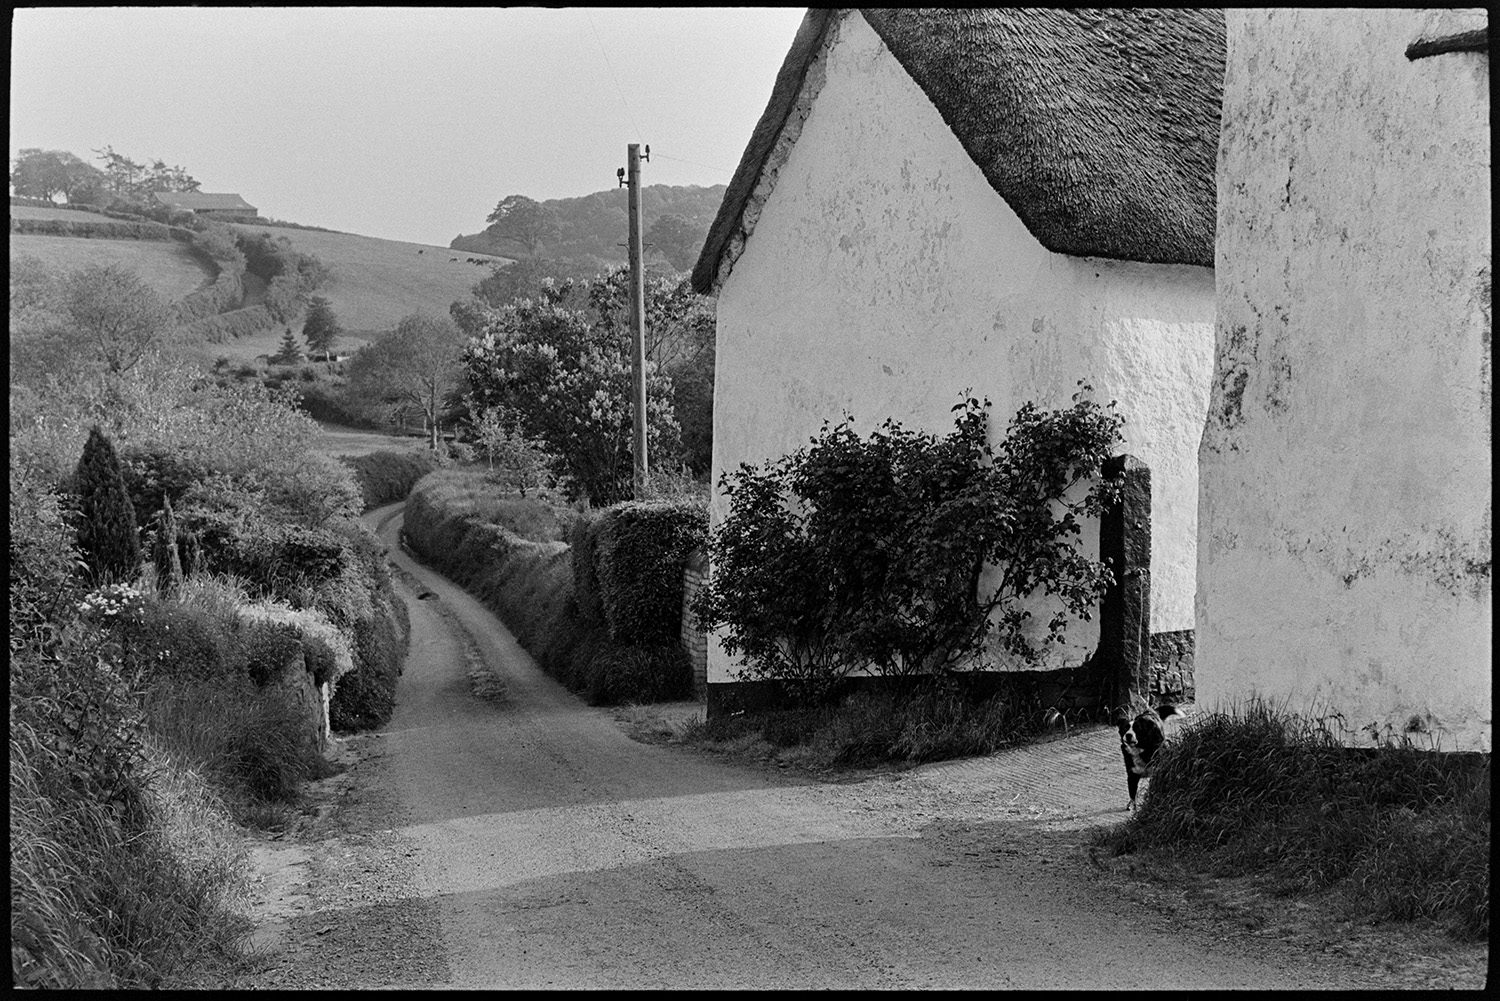 Farmer taking cows to farm. 
[A lane running past a thatched cottage at Mousehole, Iddesleigh. A dog is looking out from the entrance of the cottage. Fields, hedges and woodland can be seen in the distance.]